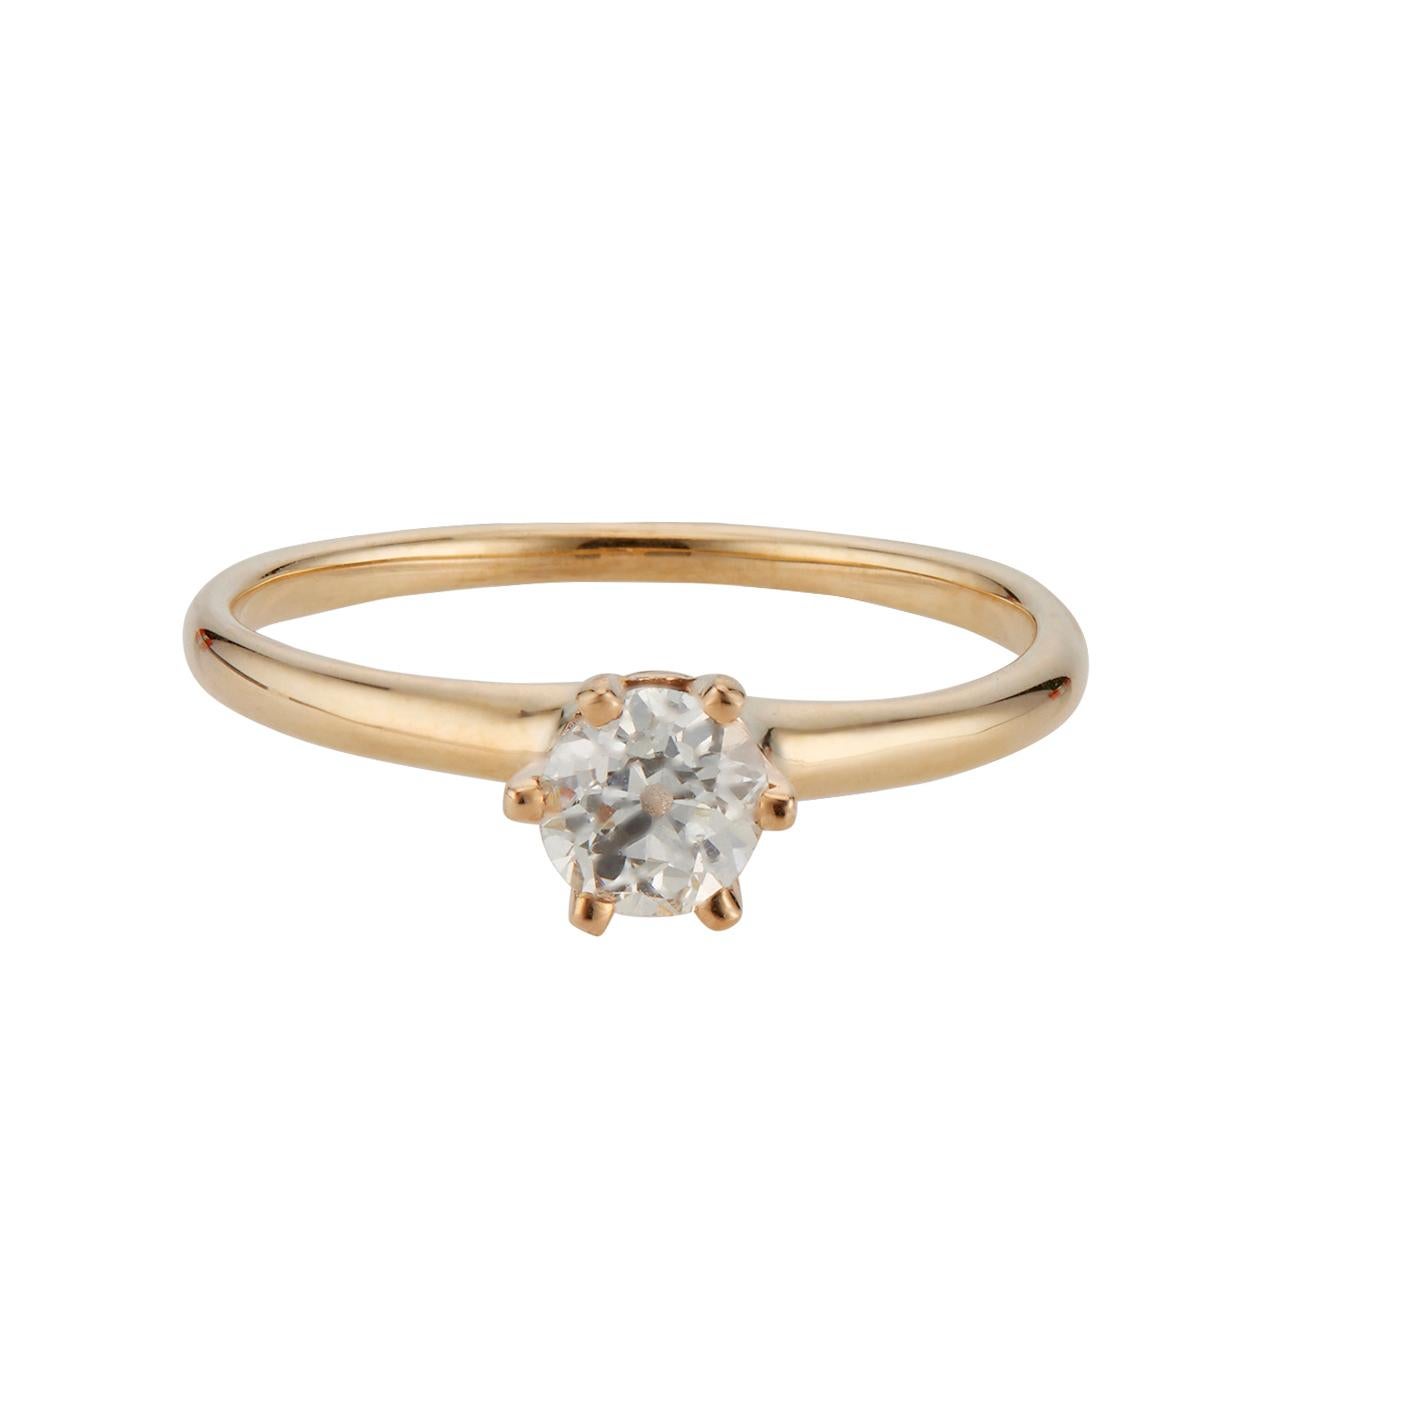 Diamond engagement ring. GIA certified Old European cut center stone, set in a 14k yellow gold, six prong solitaire setting. circa 1900's.

1 old European cut diamond, K, SI2 approx. .41cts  GIA certified# 7371914976
Size 6 and sizable 
14k yellow